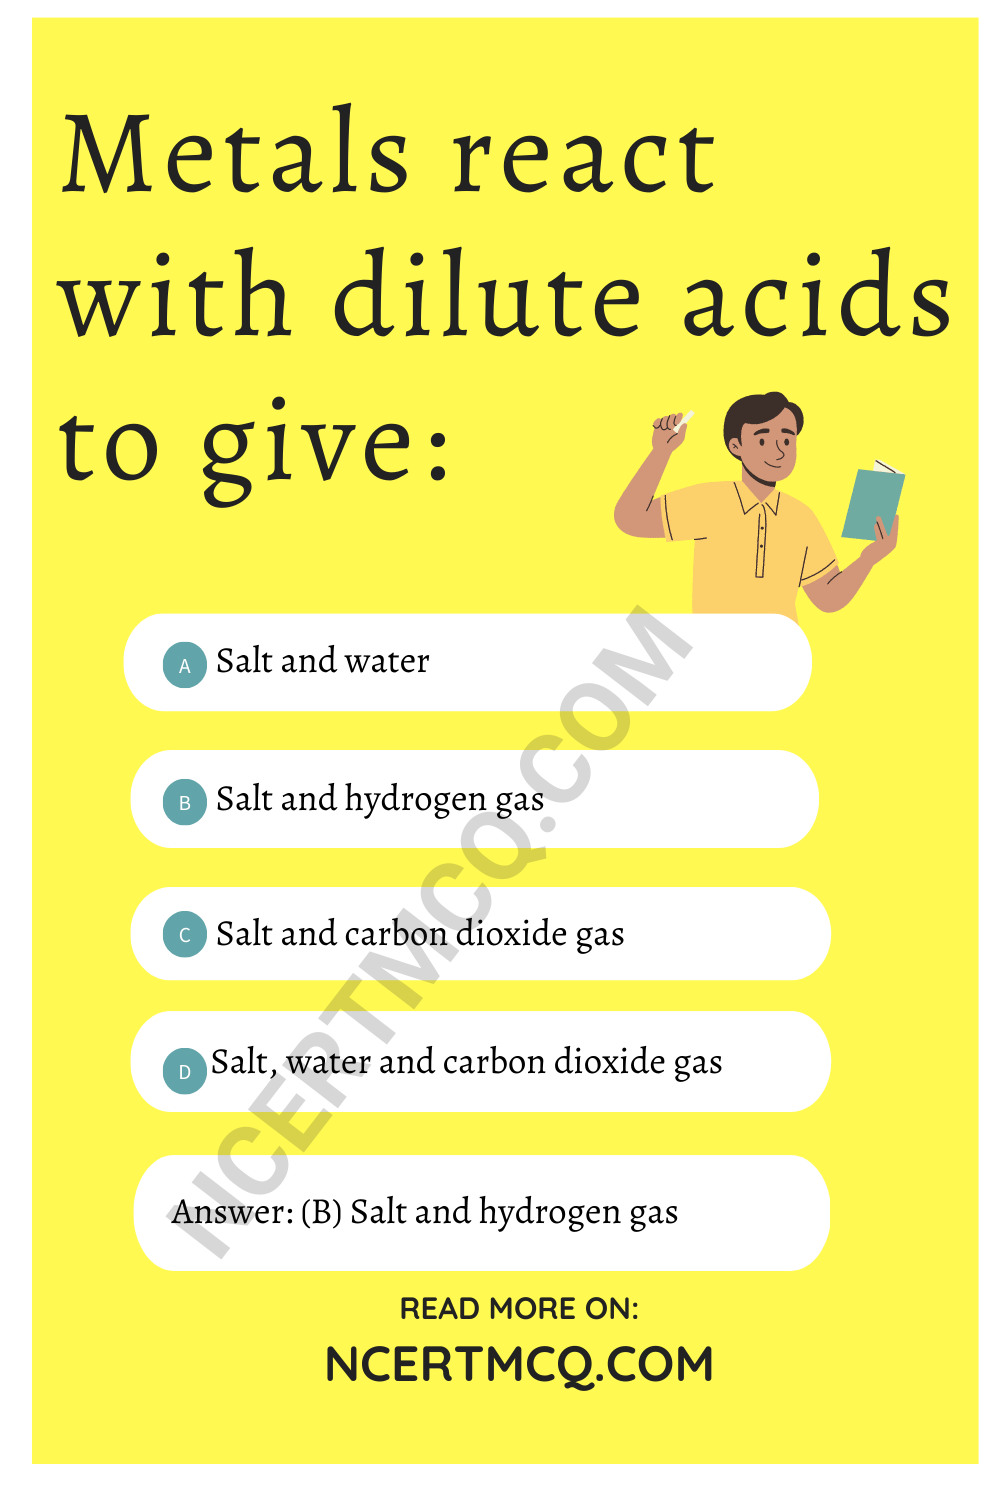 Metals react with dilute acids to give: